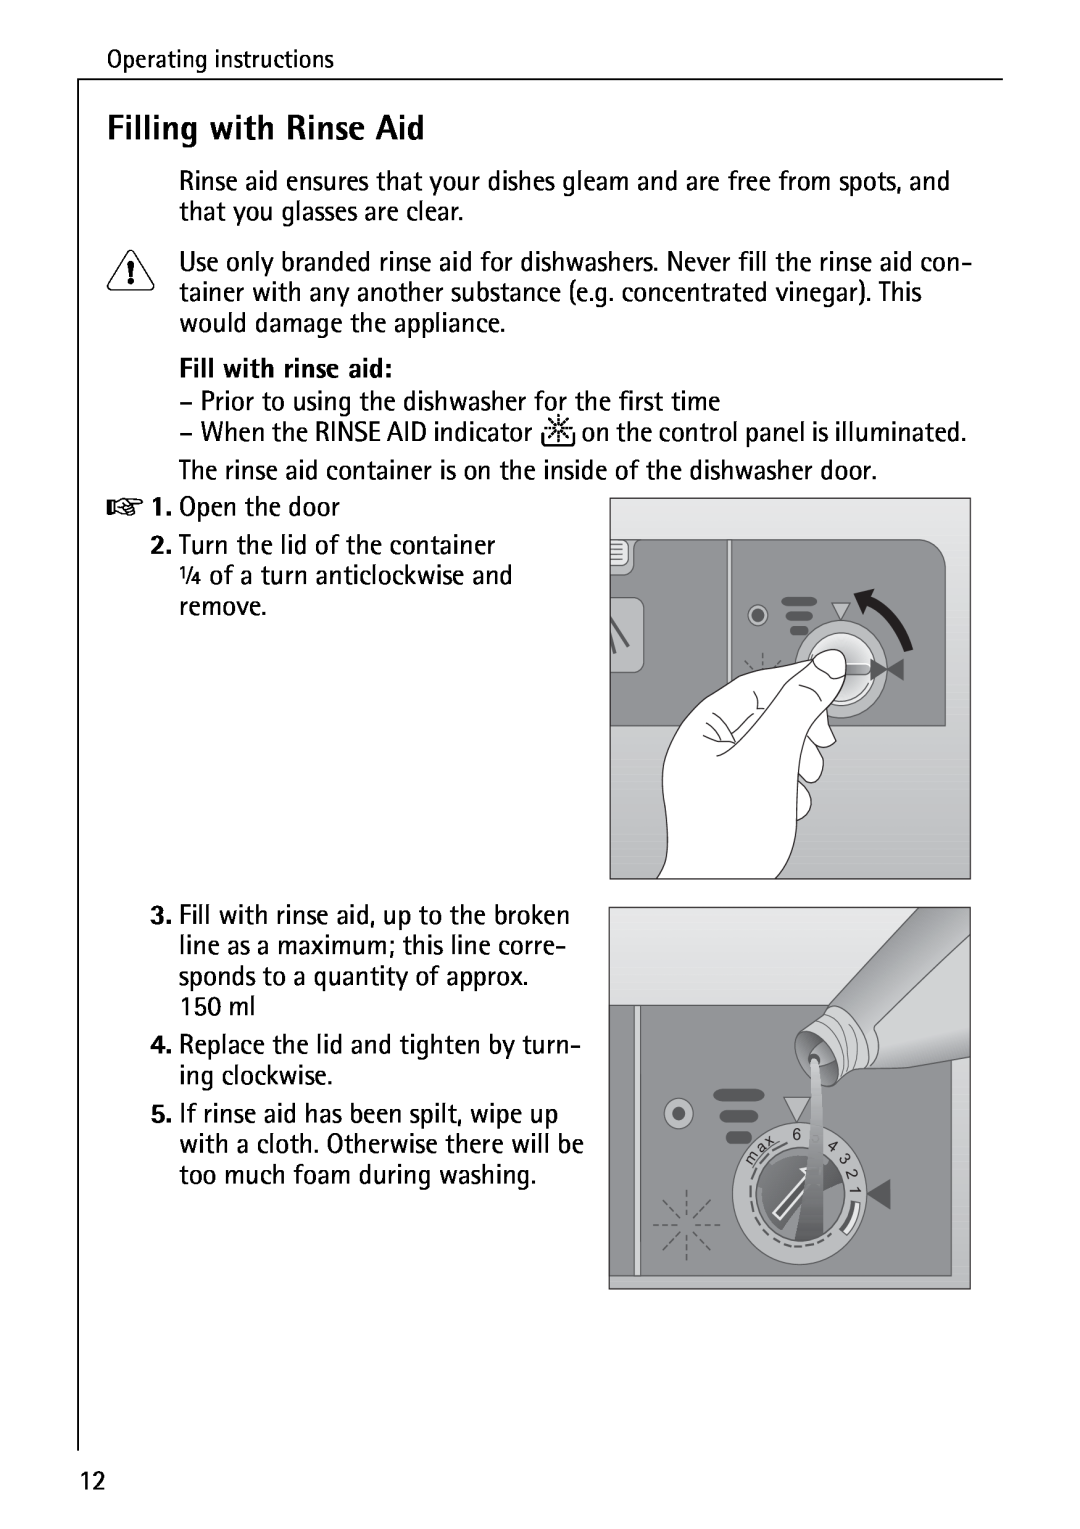 AEG 5071 manual Filling with Rinse Aid, Fill with rinse aid 